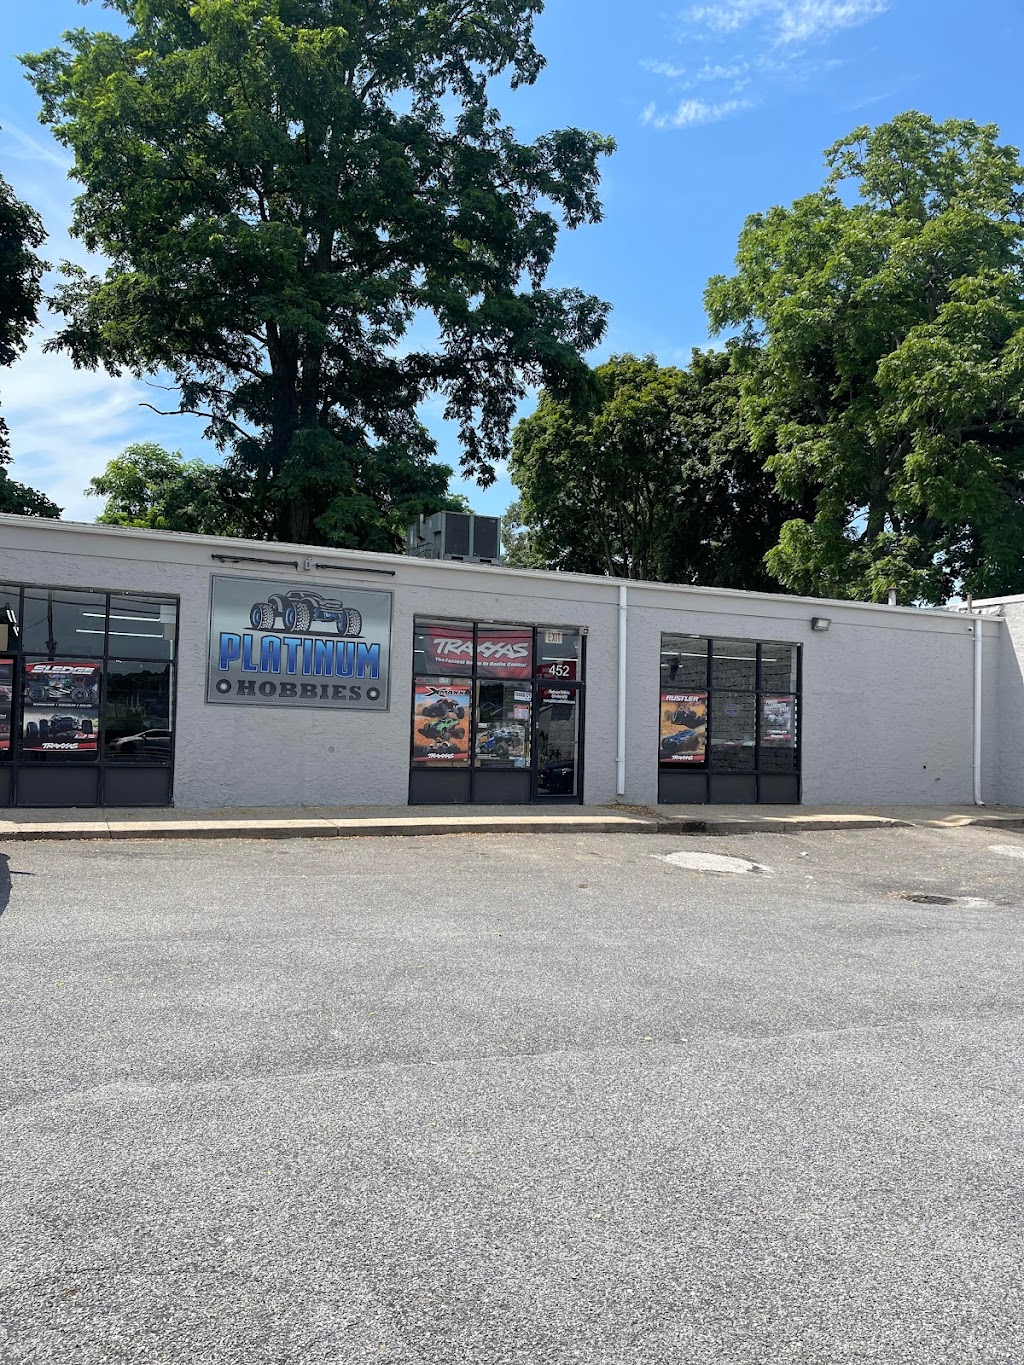 Platinum Hobbies | 452 Middle Country Rd, Selden, NY 11784 | Phone: (631) 496-5019